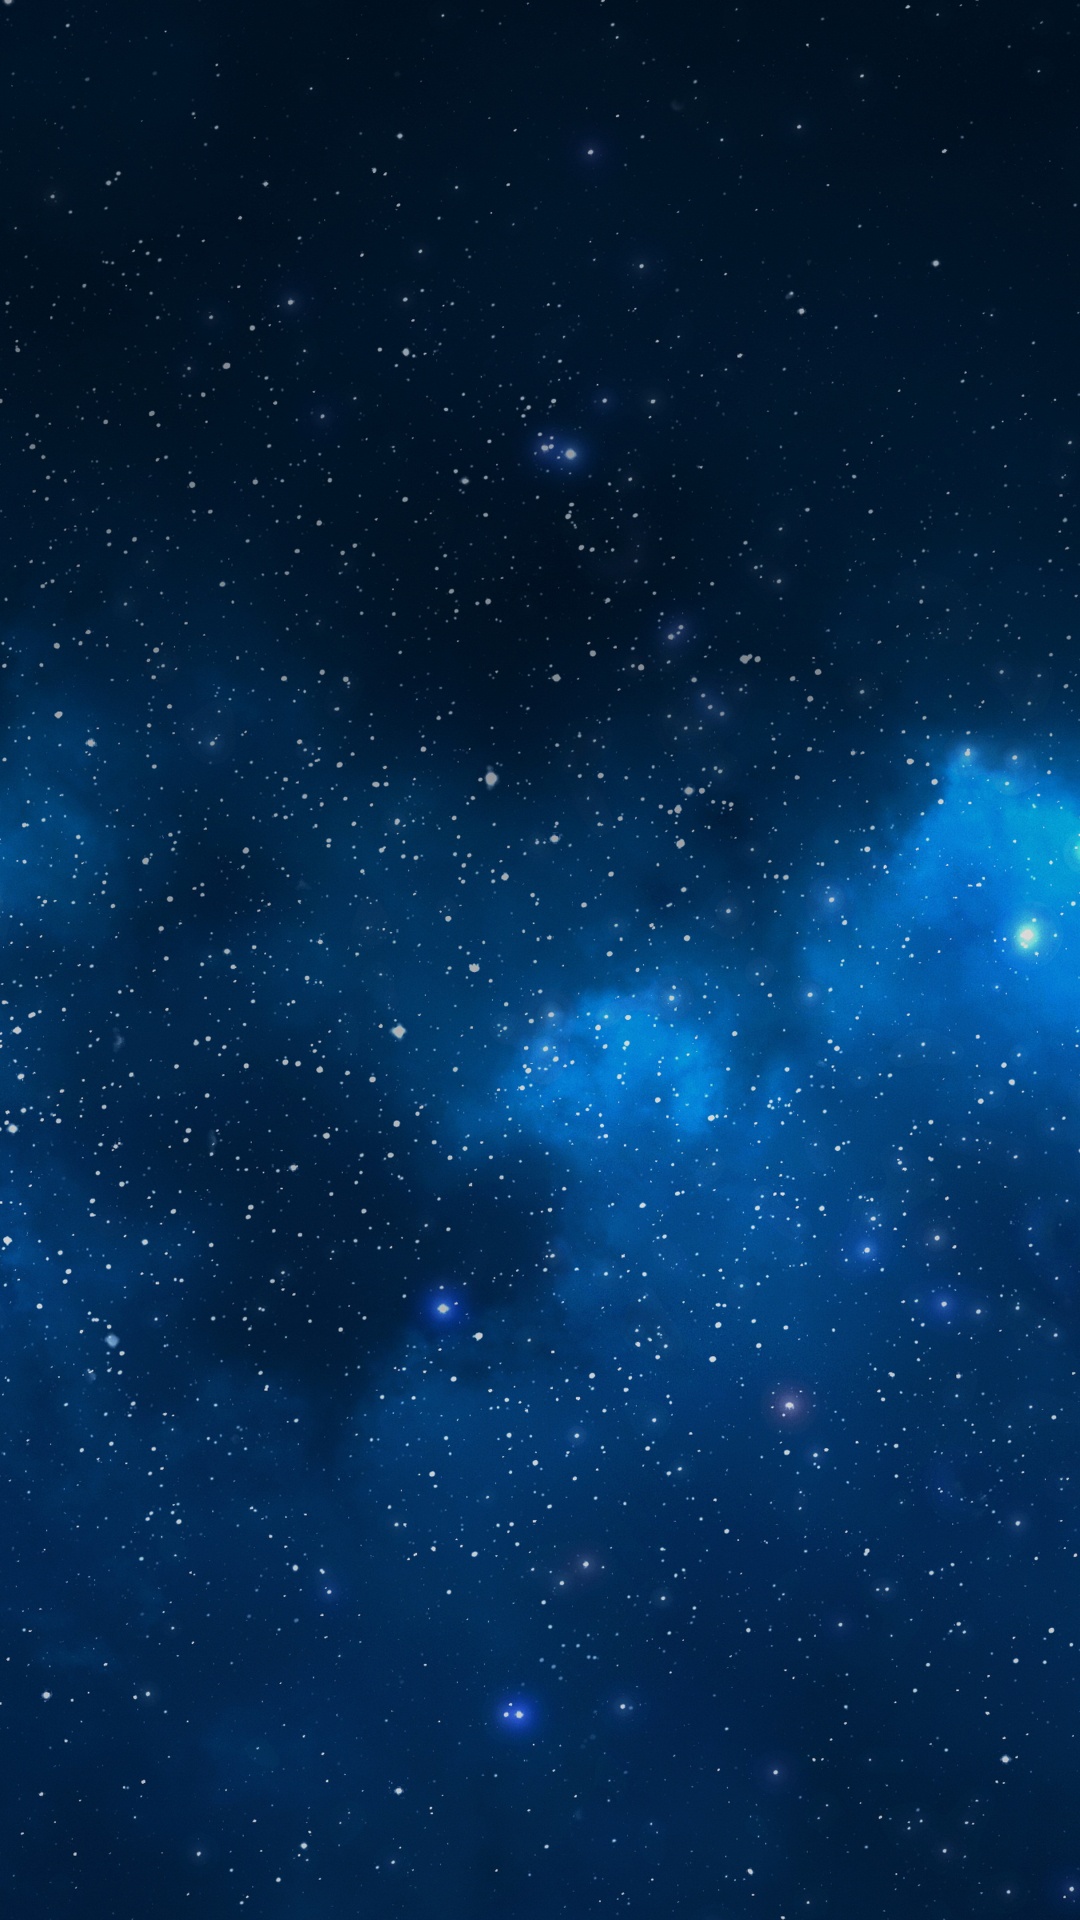 Blue and White Starry Night Sky. Wallpaper in 1080x1920 Resolution